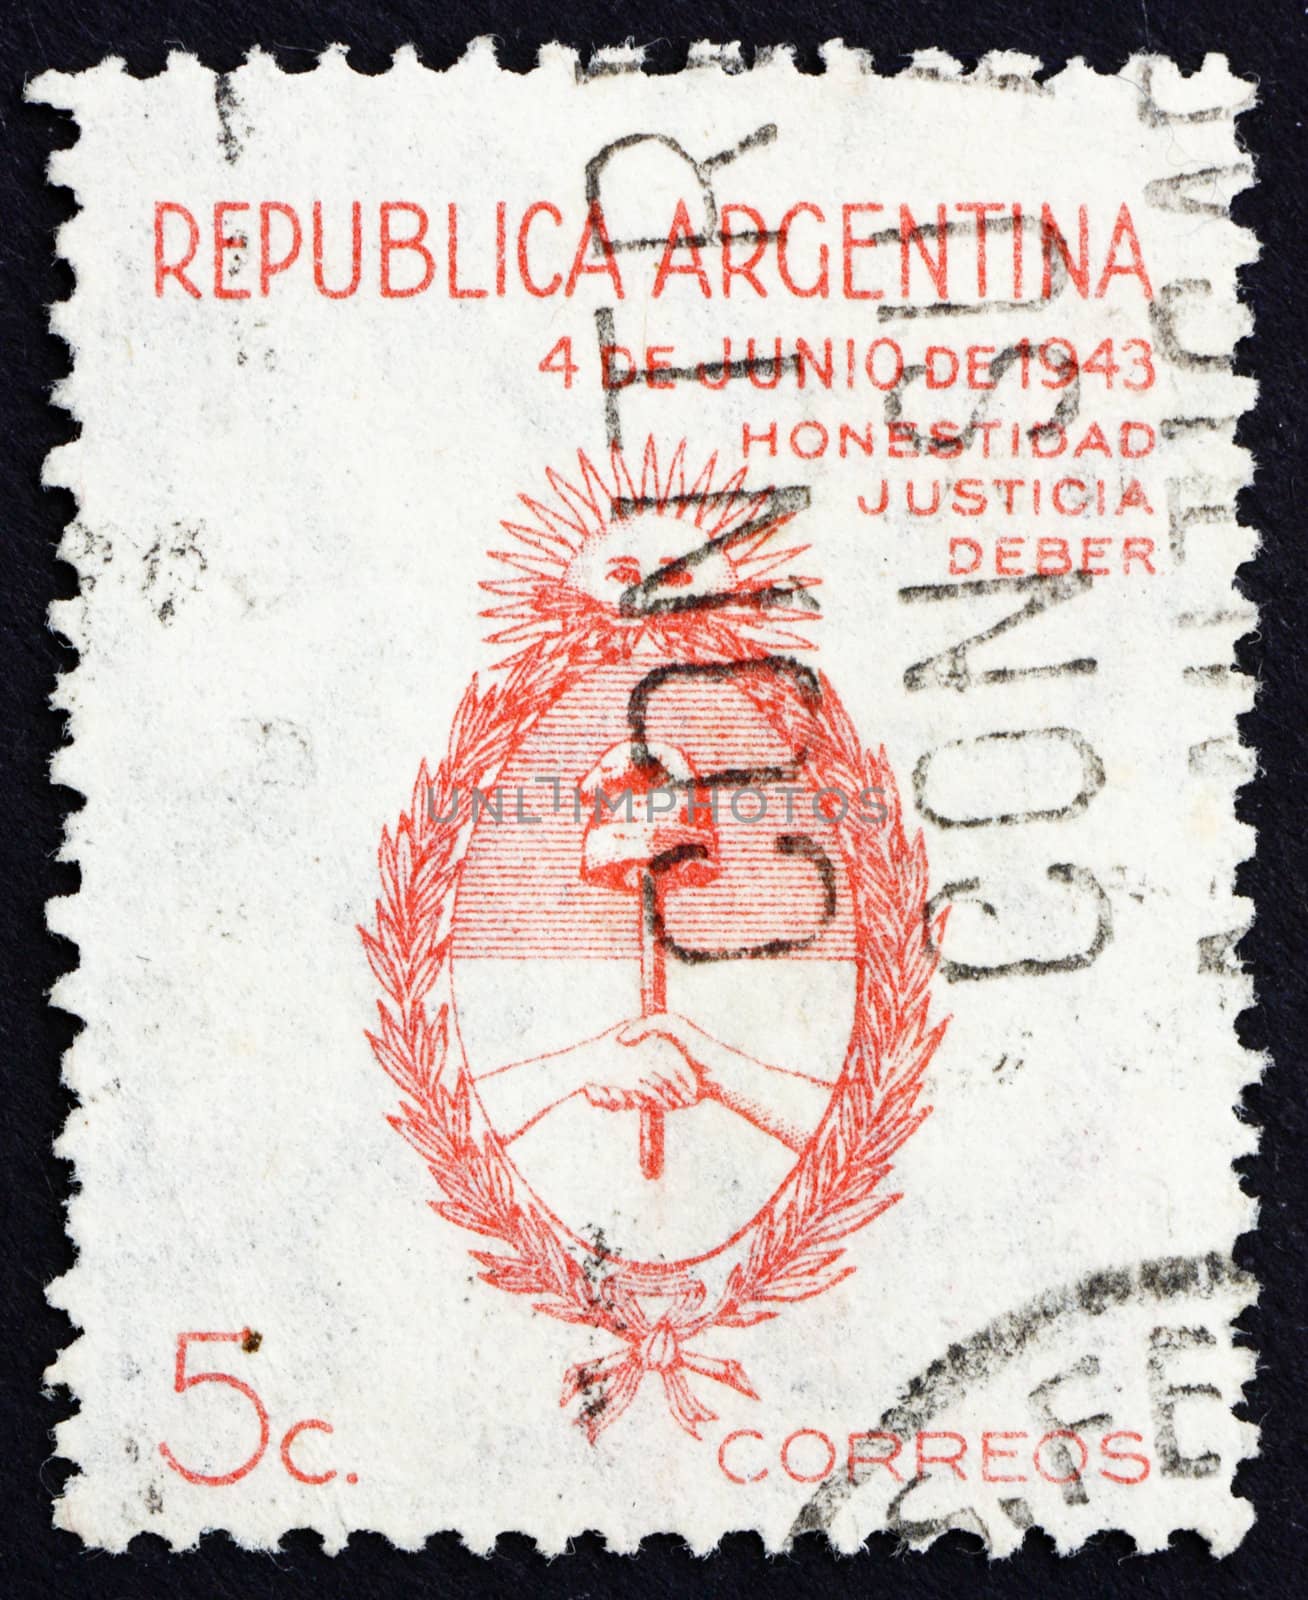 ARGENTINA - CIRCA 1943: a stamp printed in the Argentina shows Coat of Arms of Argentina Inscribed, Honesty, Justice, Duty, circa 1943